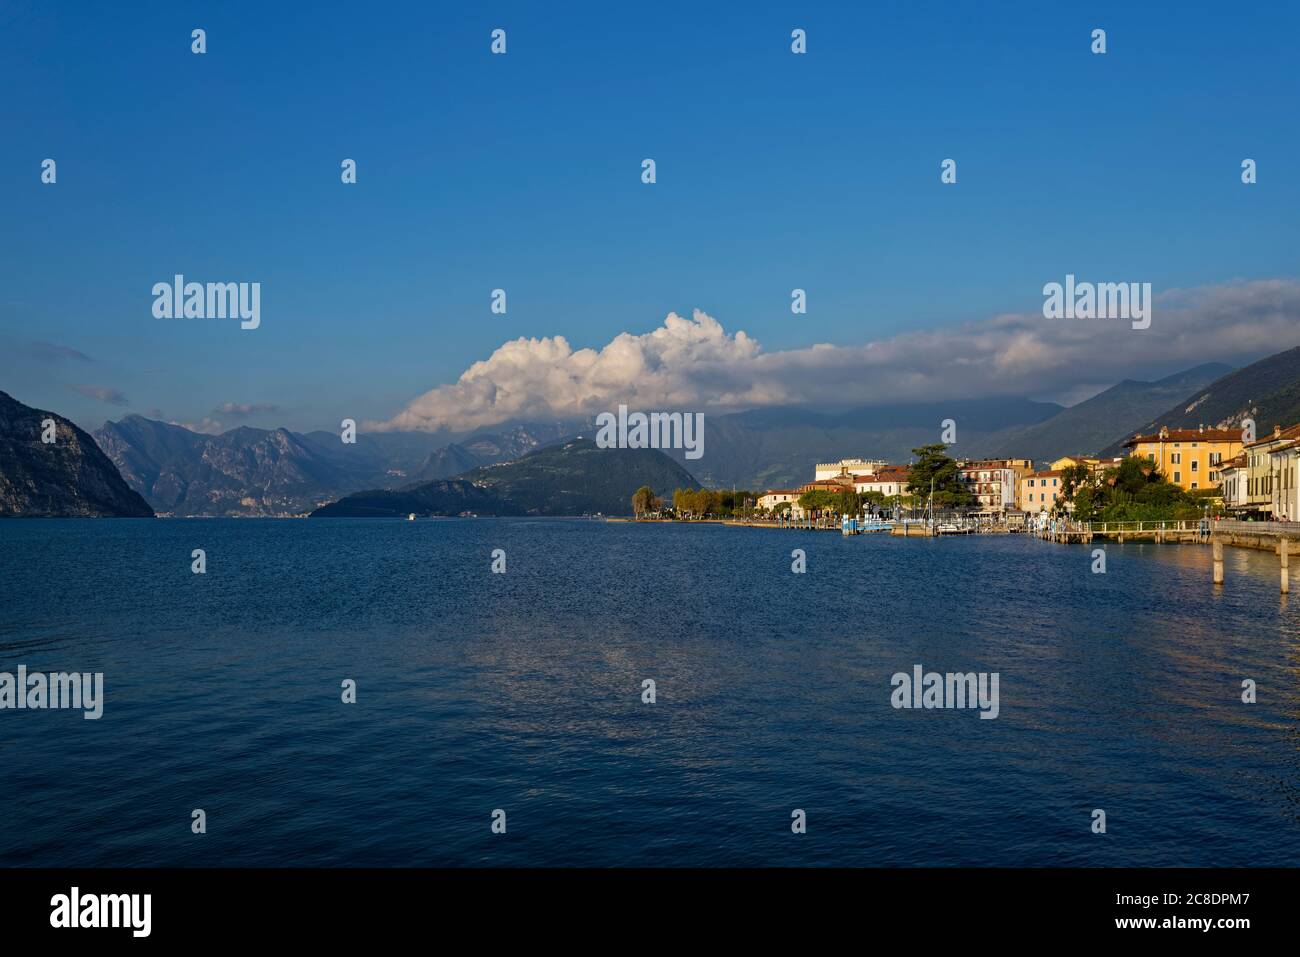 Italy, Lombardy, Lake Iseo and town at sunset Stock Photo